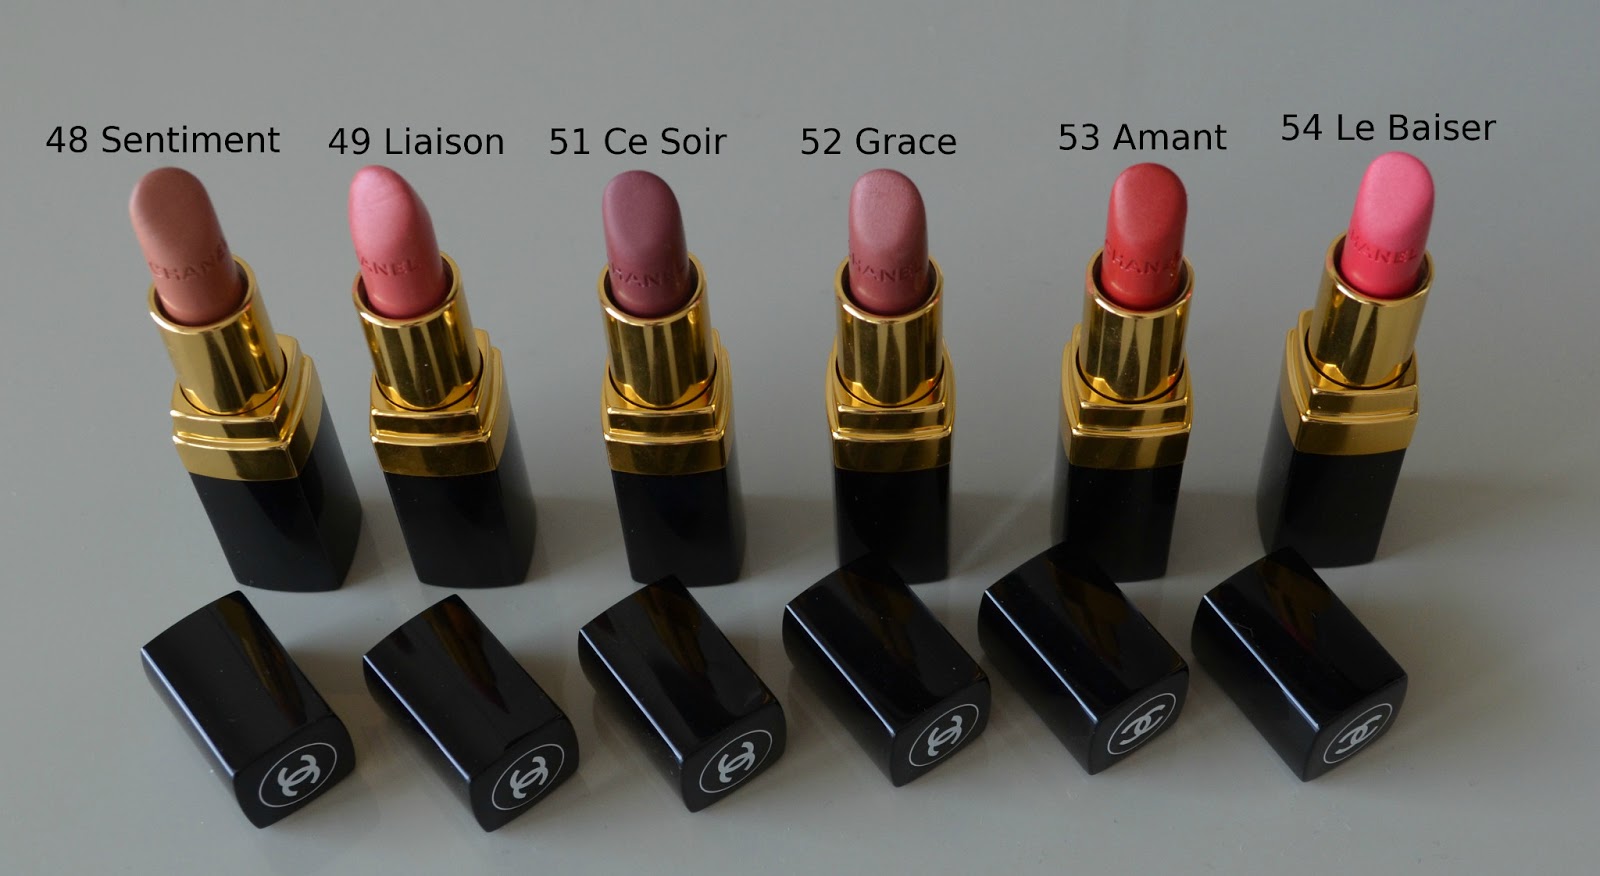 Complete Review of Rouge Cocos from upcoming Avant Première de Chanel  Collection